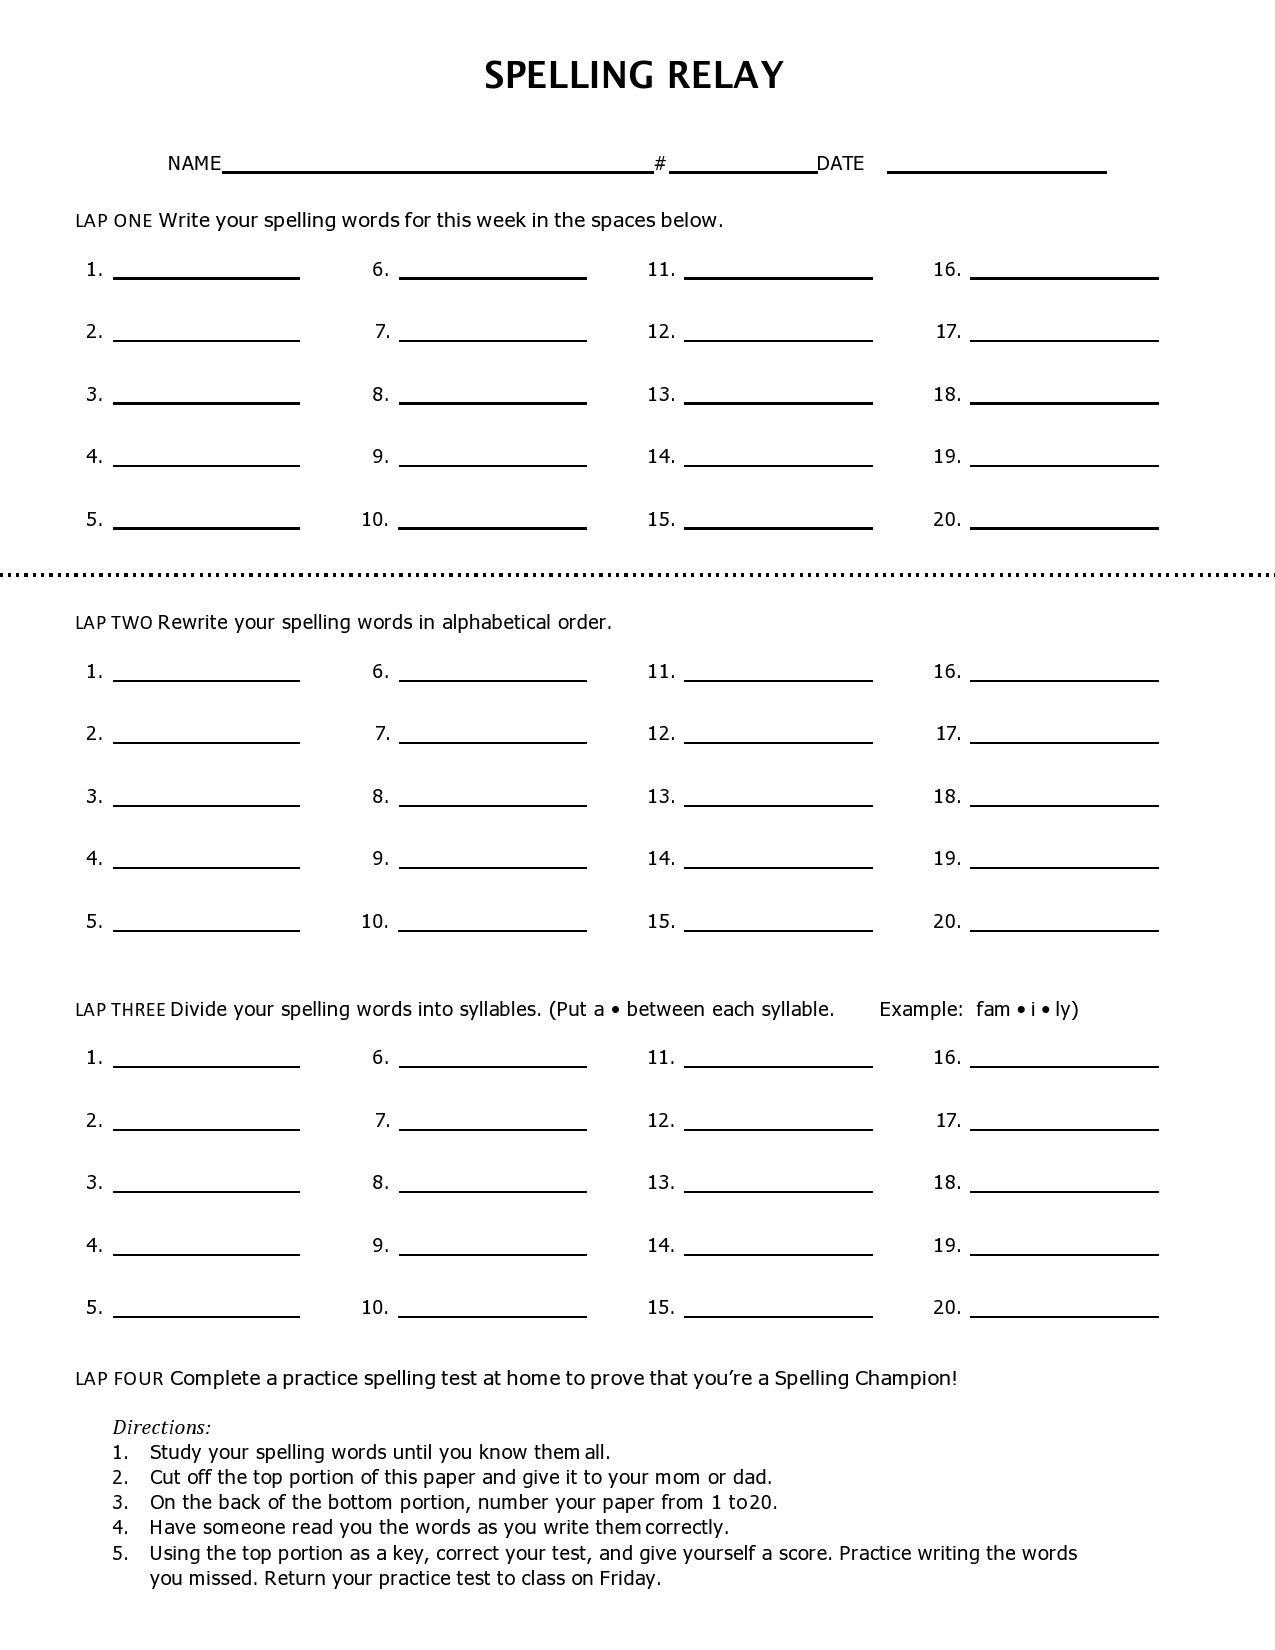 Free spelling test template 07